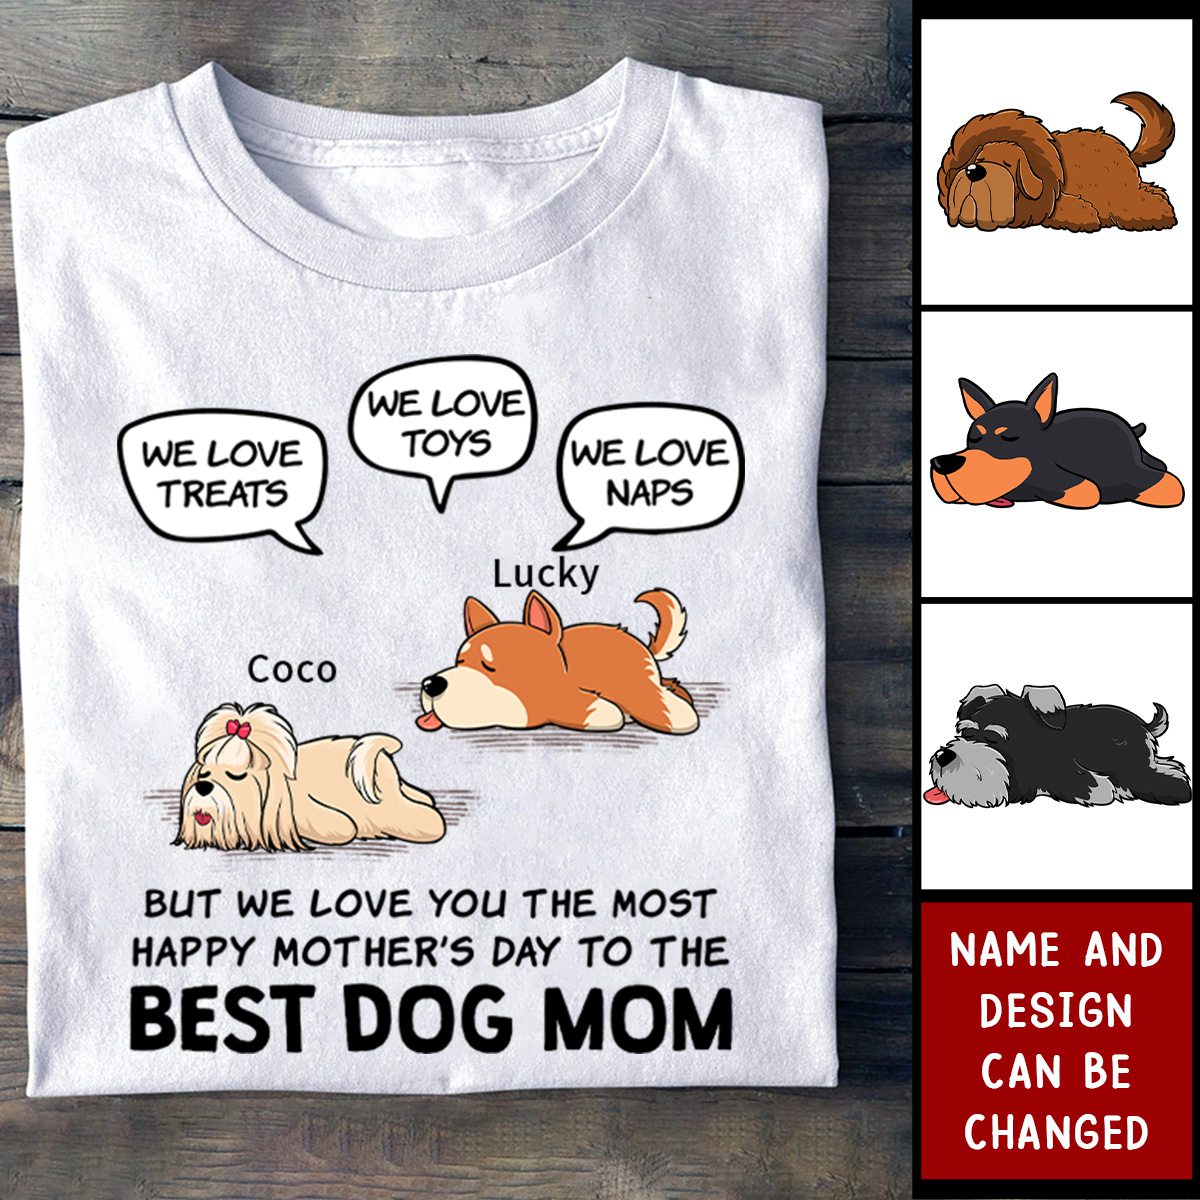 But I Love You The Most - Personalized T-shirt - Mother's Day, Gift For Pet Owners, Pet Lovers